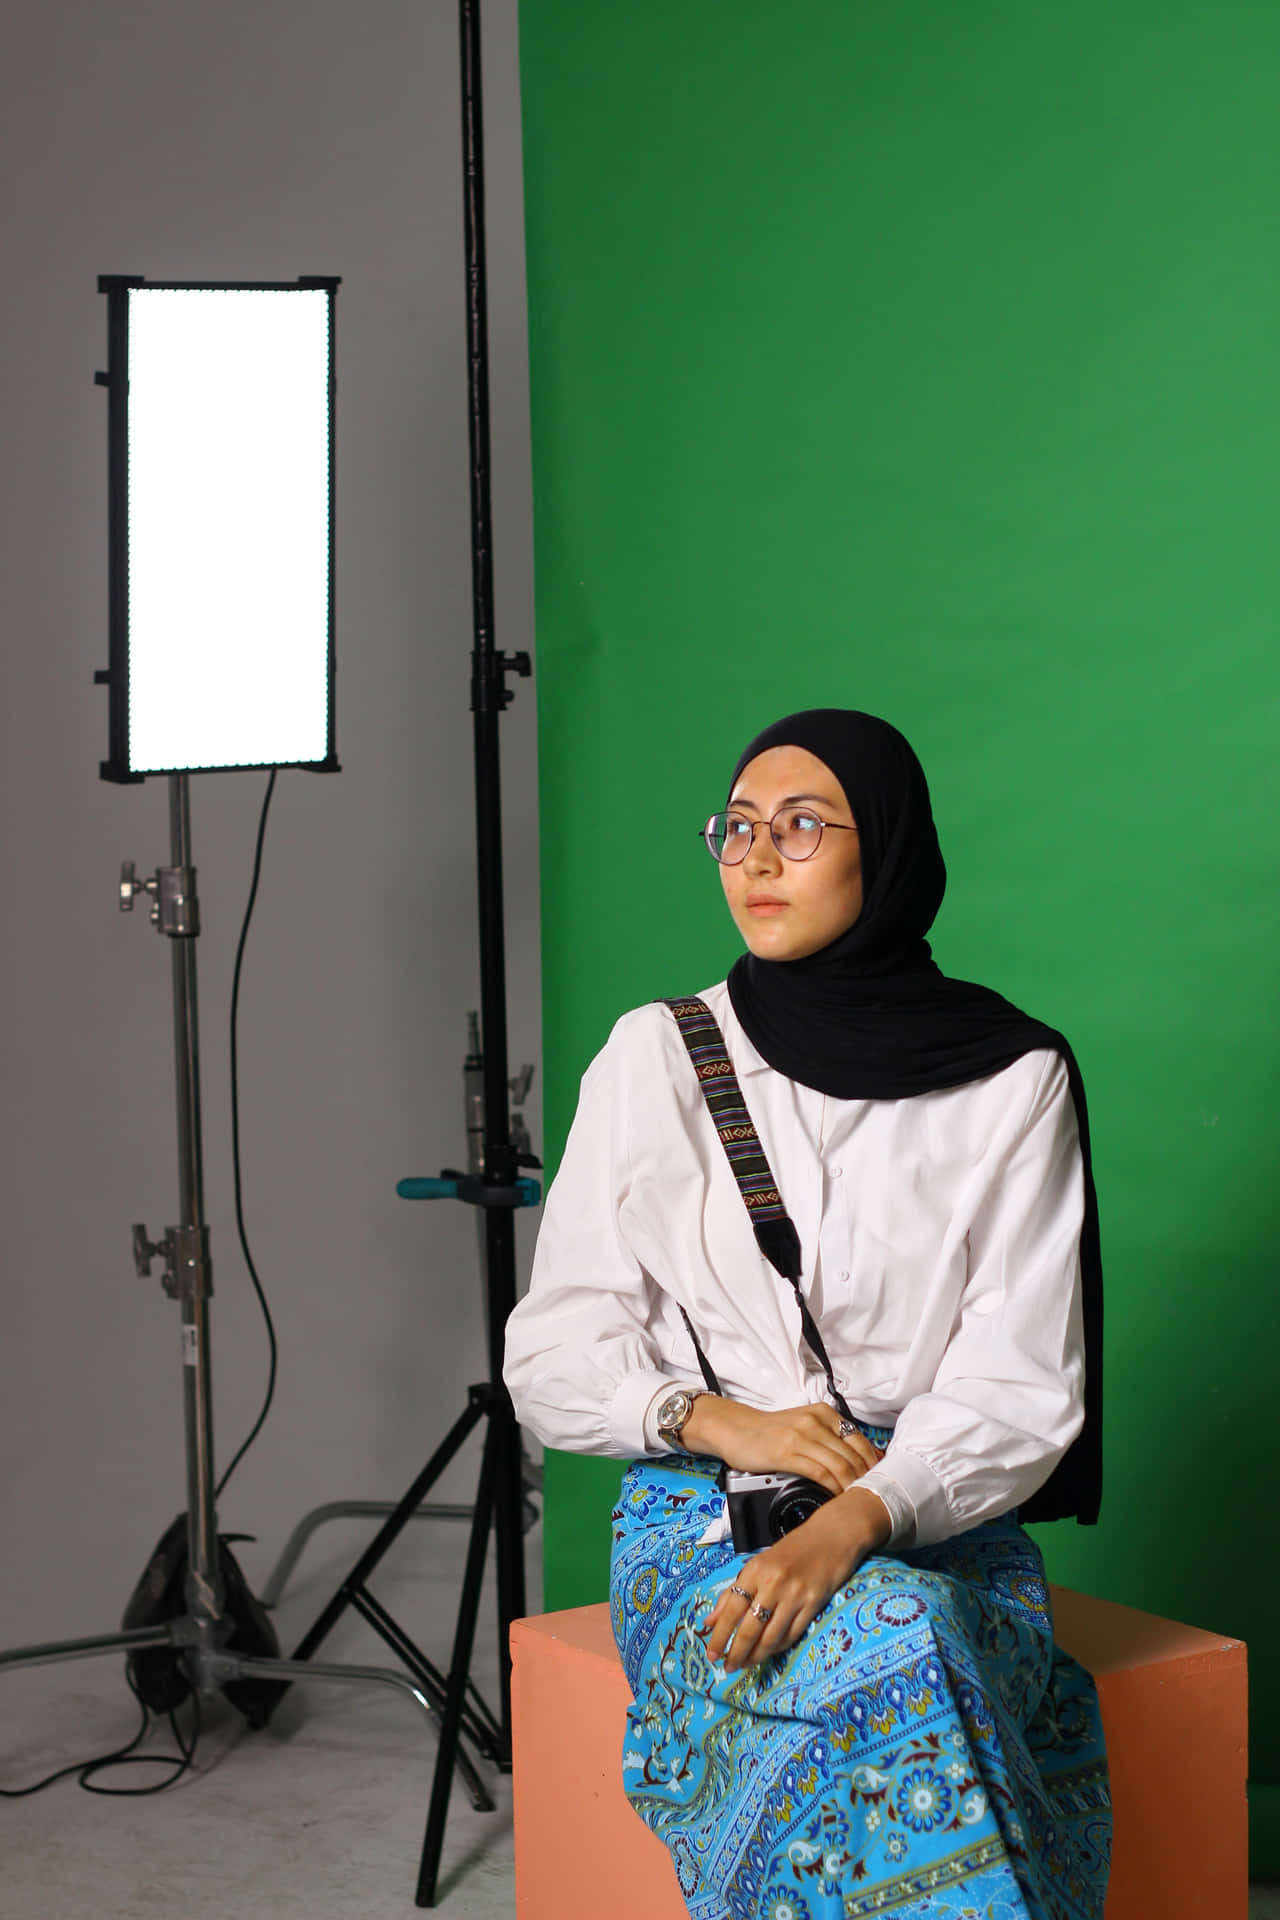 A Woman In A Hijab Sitting On A Stool In Front Of A Green Screen